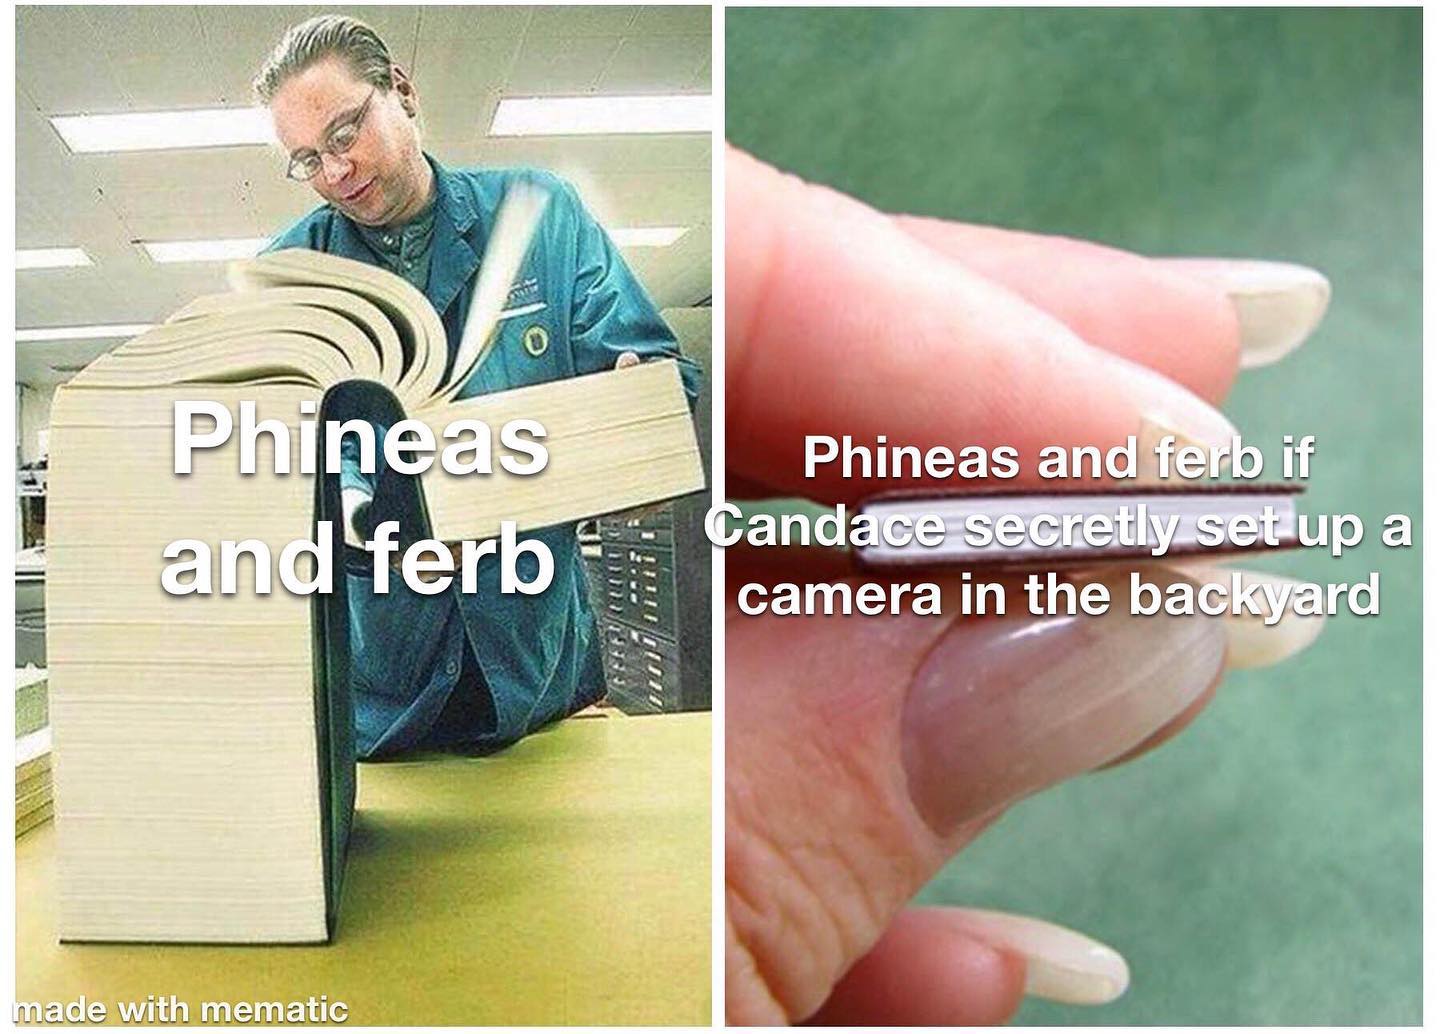 dank memes - 日本 語 memes - Phineas and ferb Phineas and ferb if Candace secretly set up a camera in the backyard made with mematic